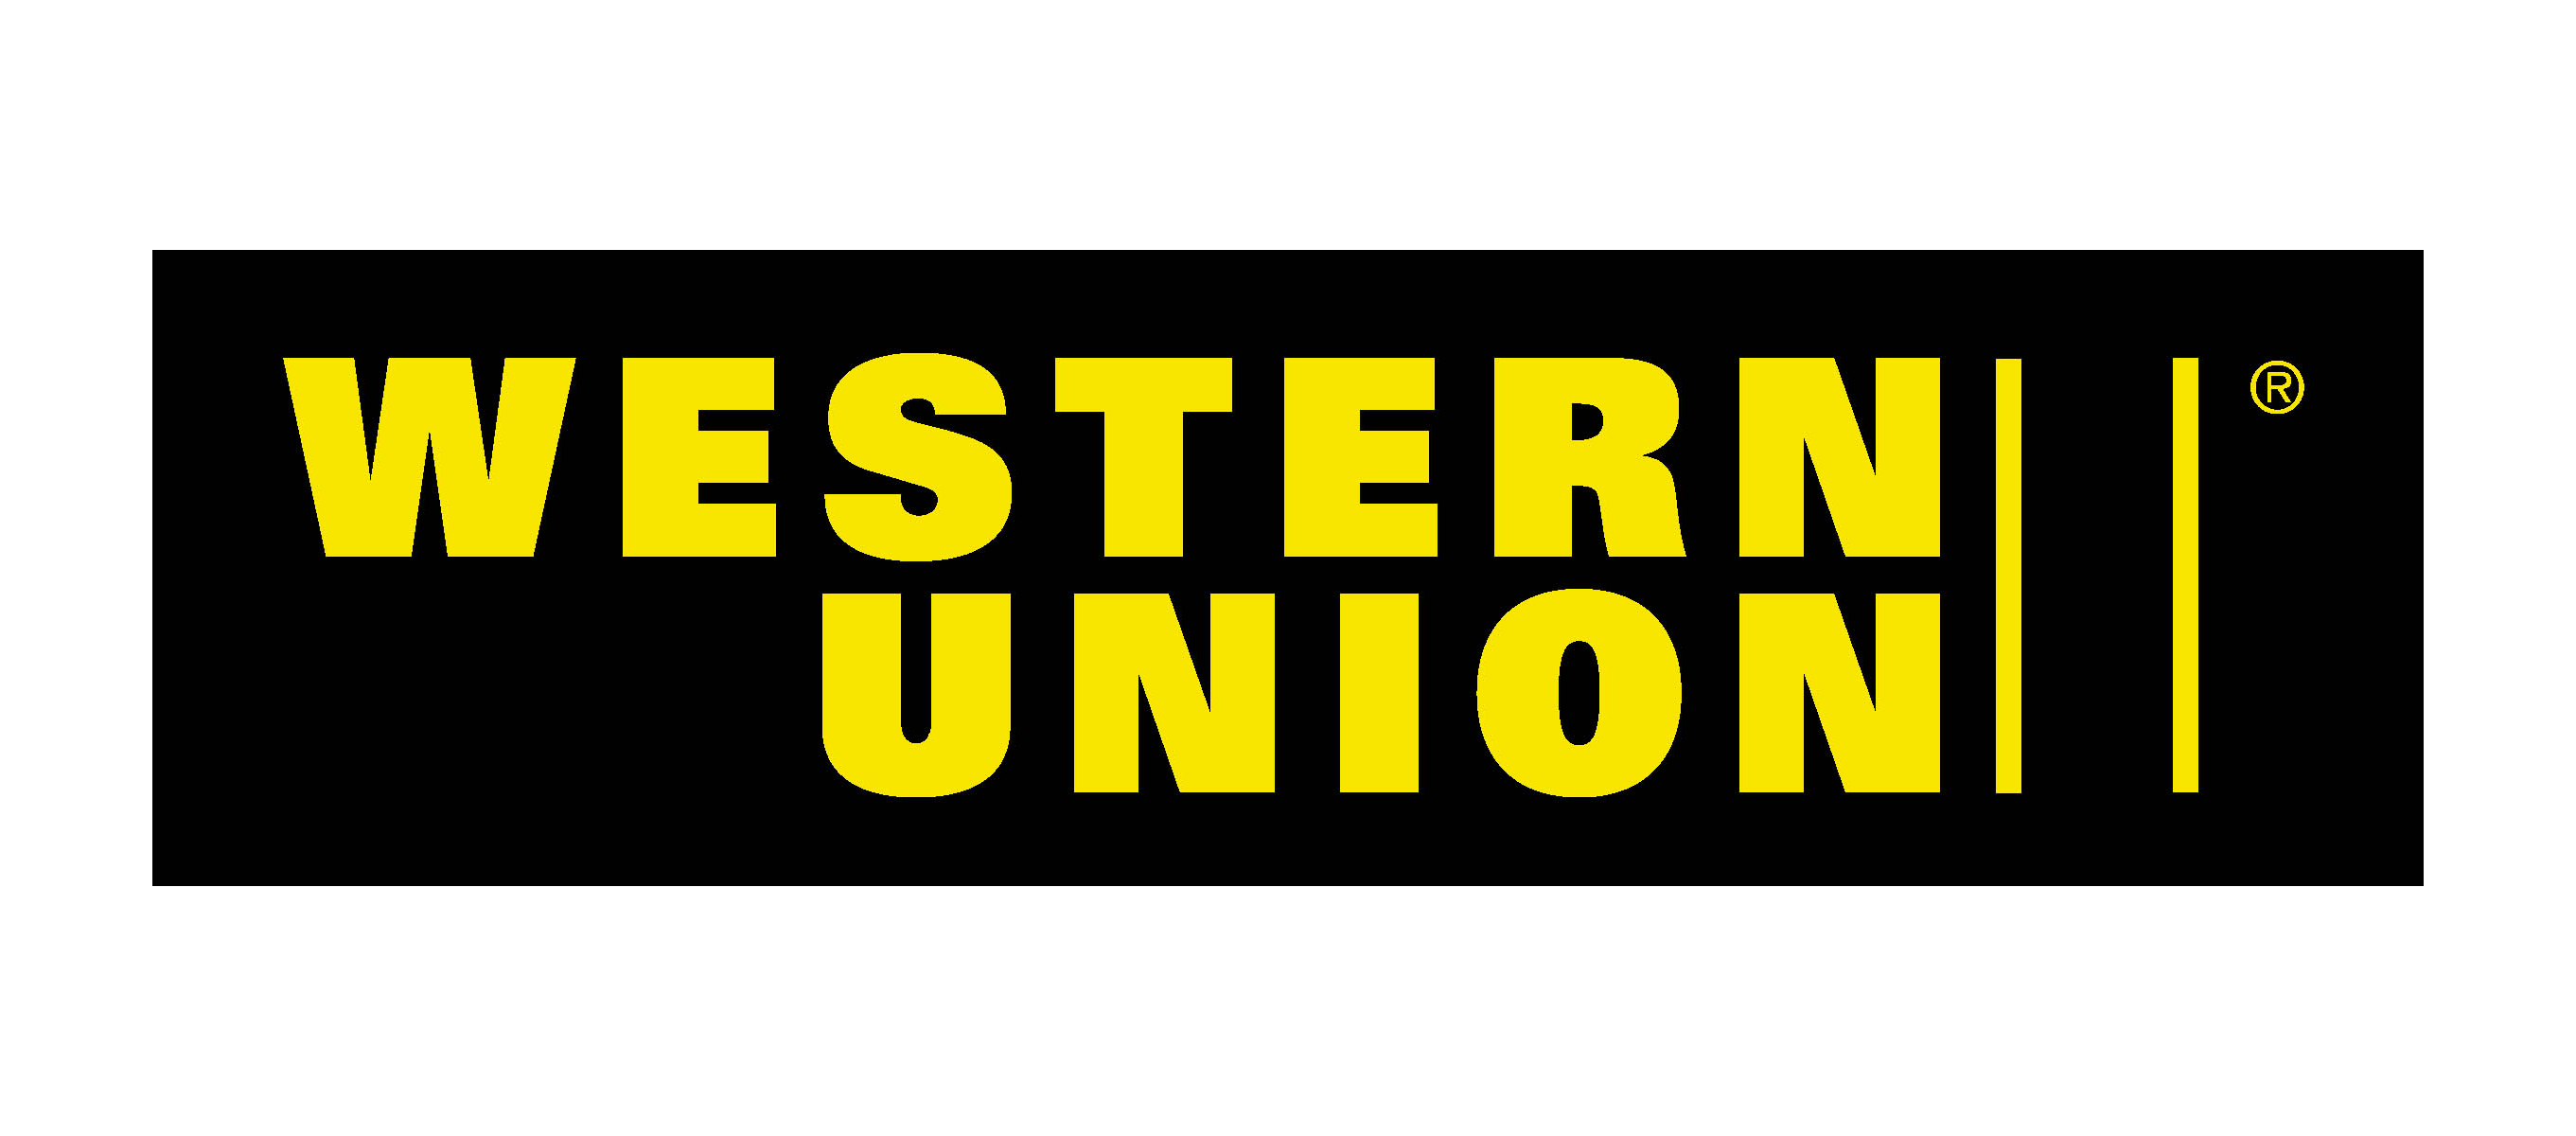 Get $250 From Western Union! No Receipt Needed! - Western Union, Transparent background PNG HD thumbnail